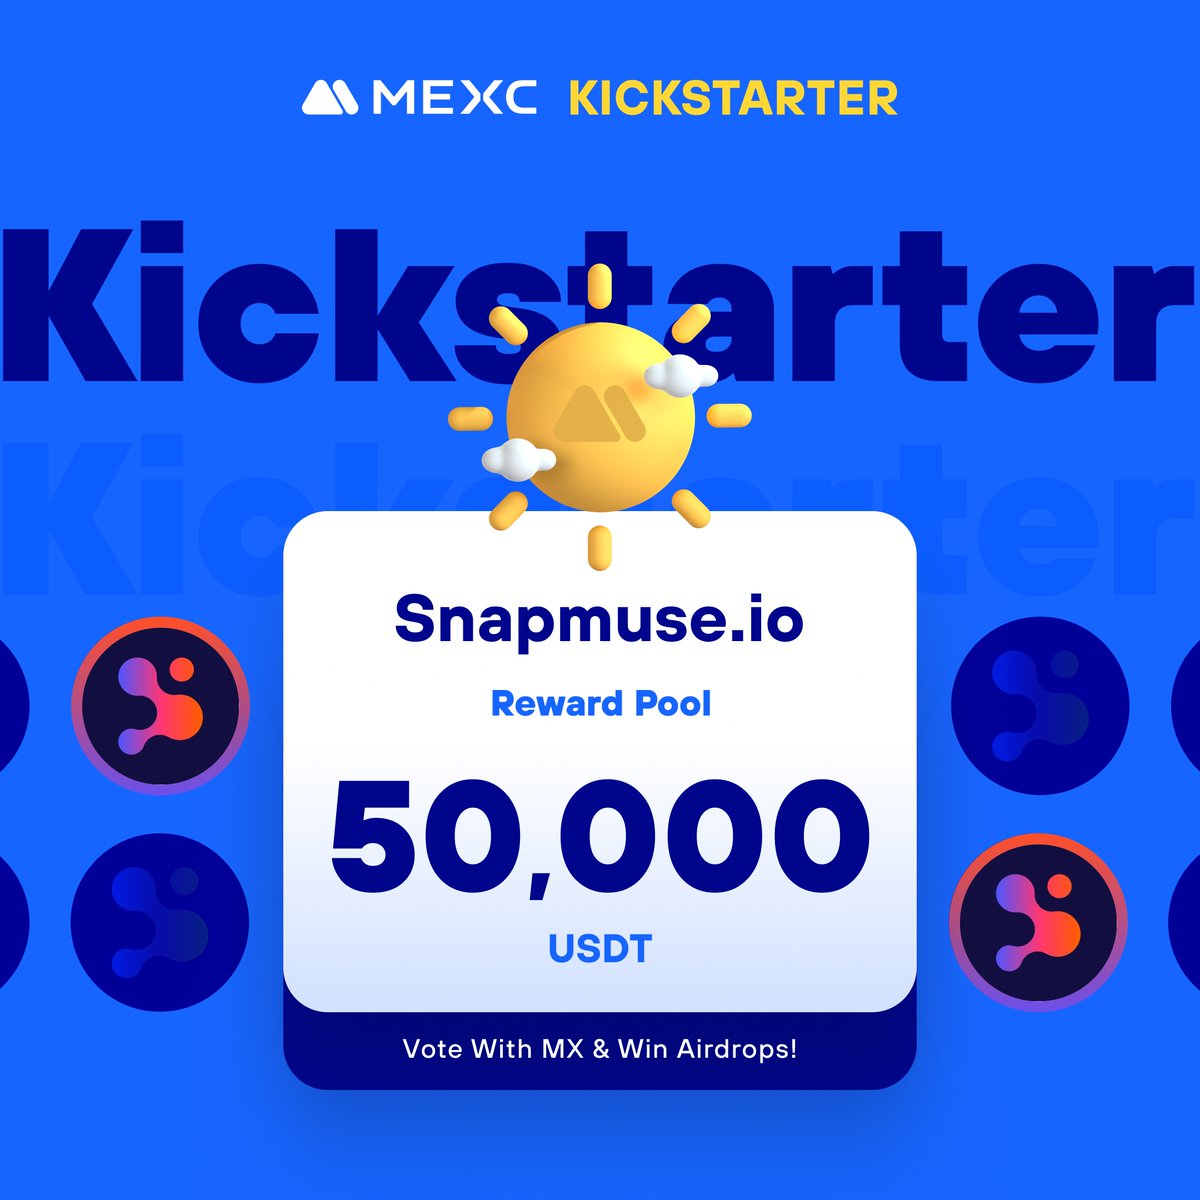 .@snapmuseio, the web3 funding platform of the entertainment industry, is coming to #MEXCKickstarter 🚀 

🗳Vote with $MX to share massive airdrops 
📈 $SMX/USDT Trading: 2024-04-19 13:00 (UTC)  

Details: mexc.com/support/articl…